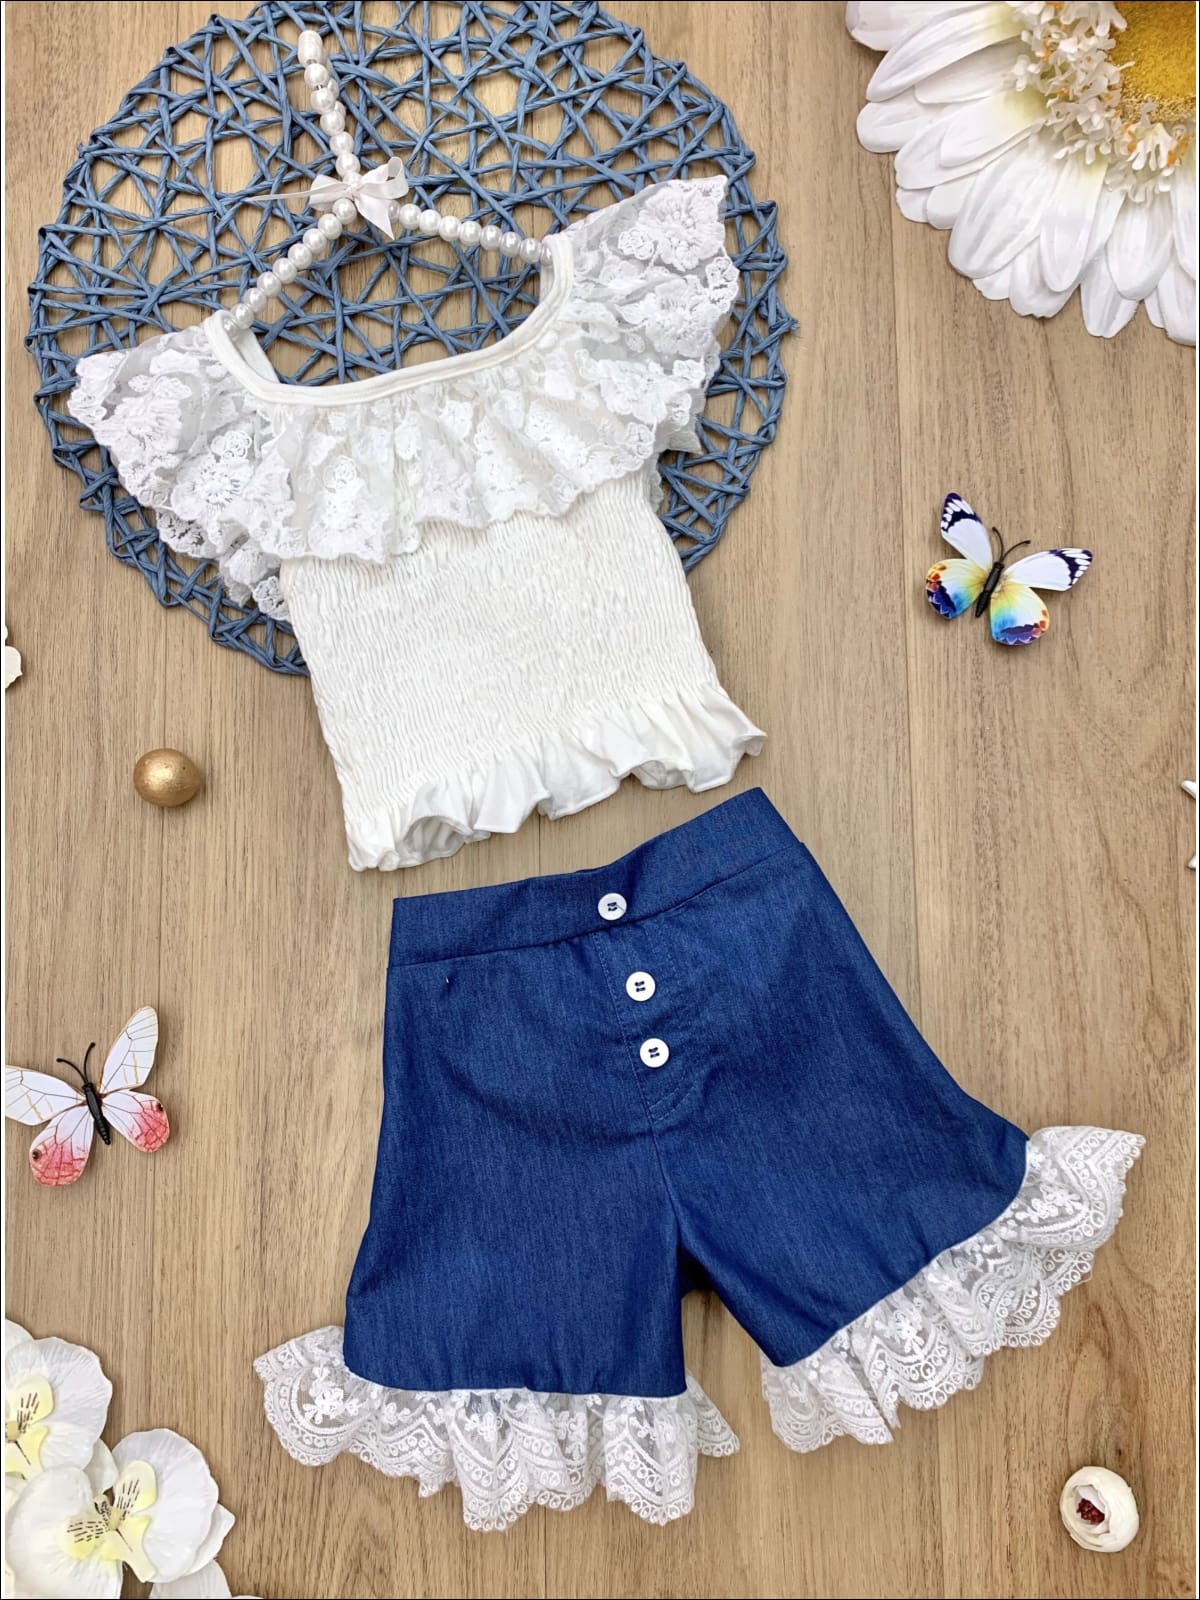 Girls Smocked Lace Ruffled Top and Denim Button Shorts Set - White / 2T/3T - Girls Spring Casual Set